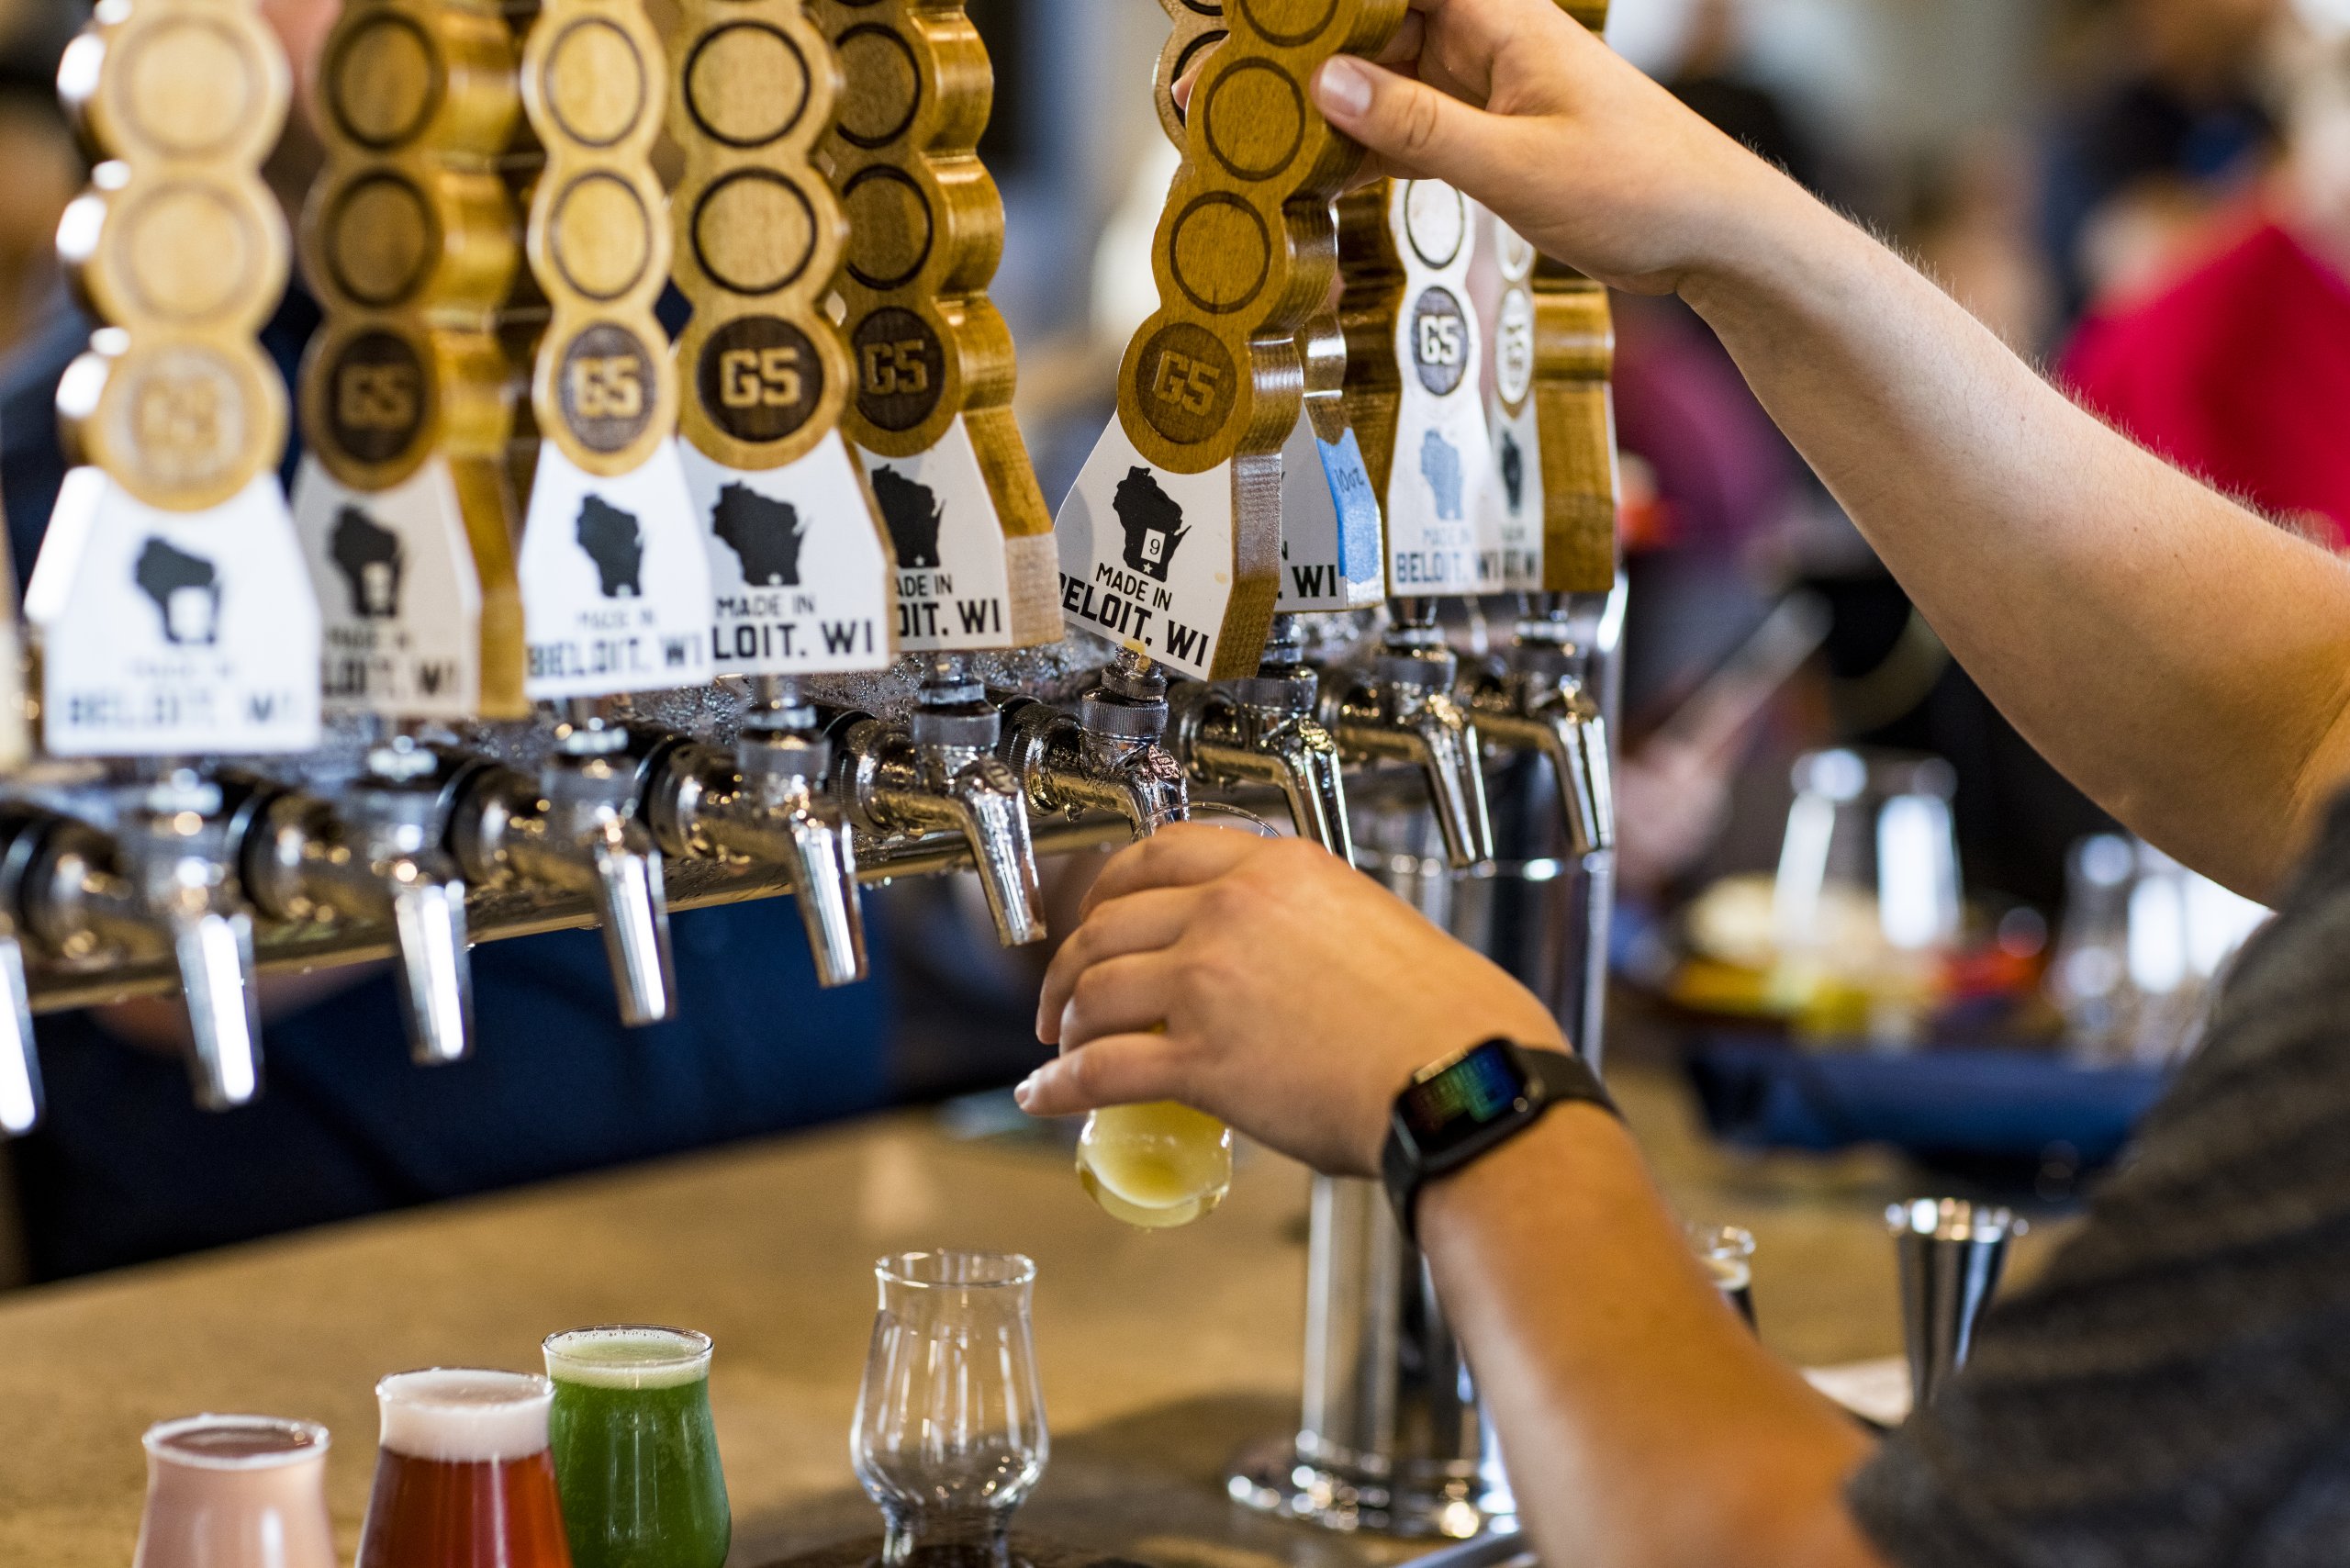 A man pours a craft beer at G5 Brewing